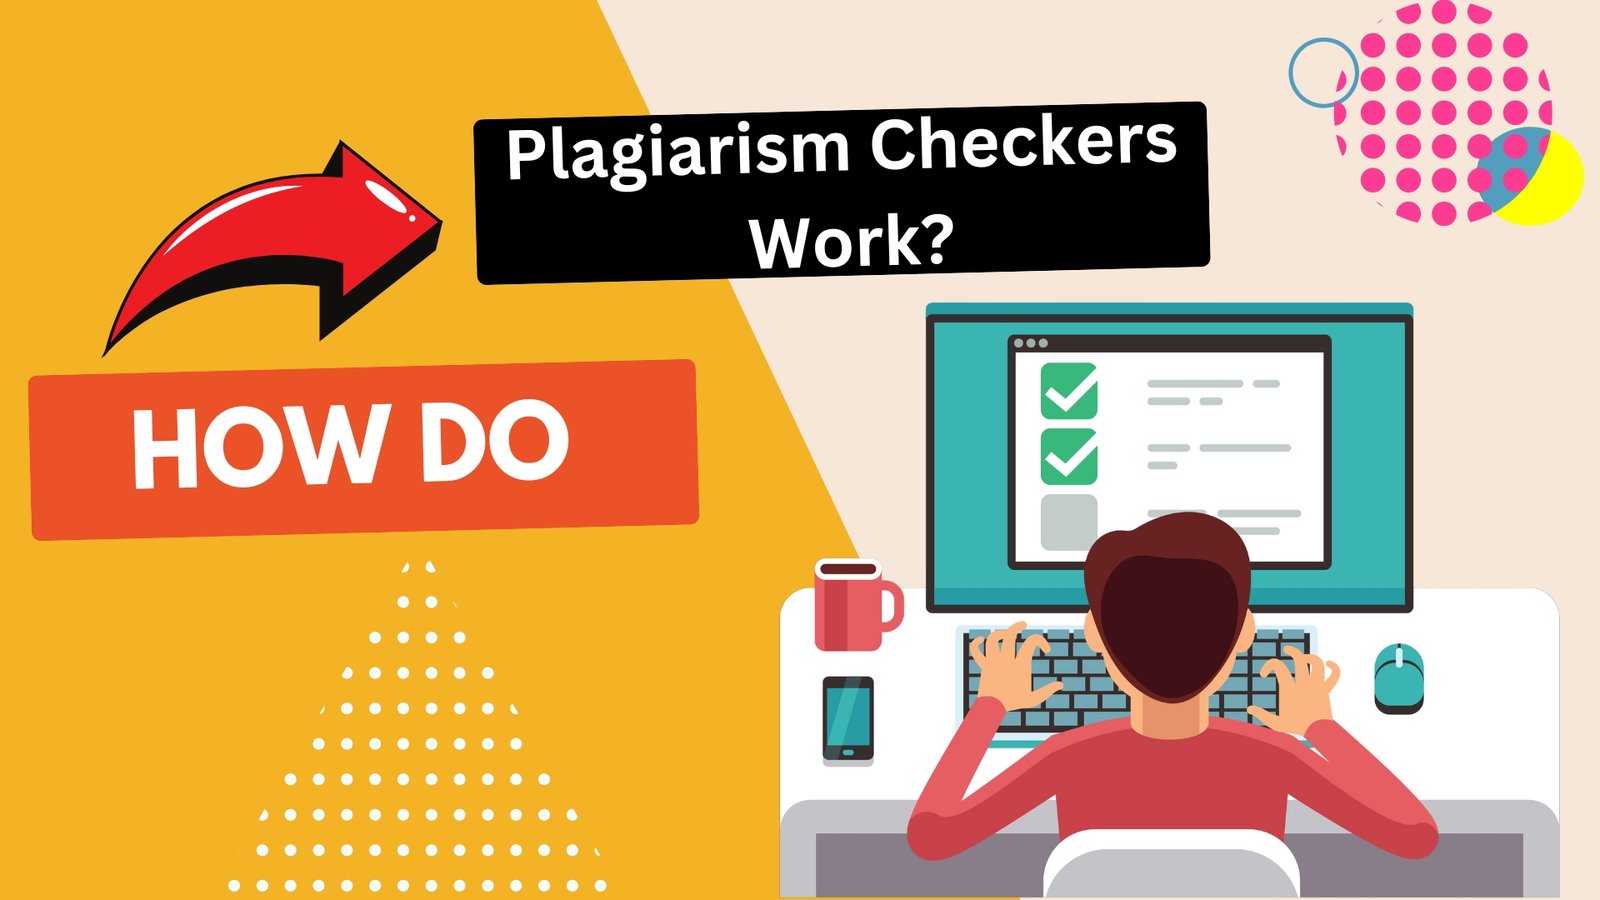 How to Do Plagiarism Checkers Work?